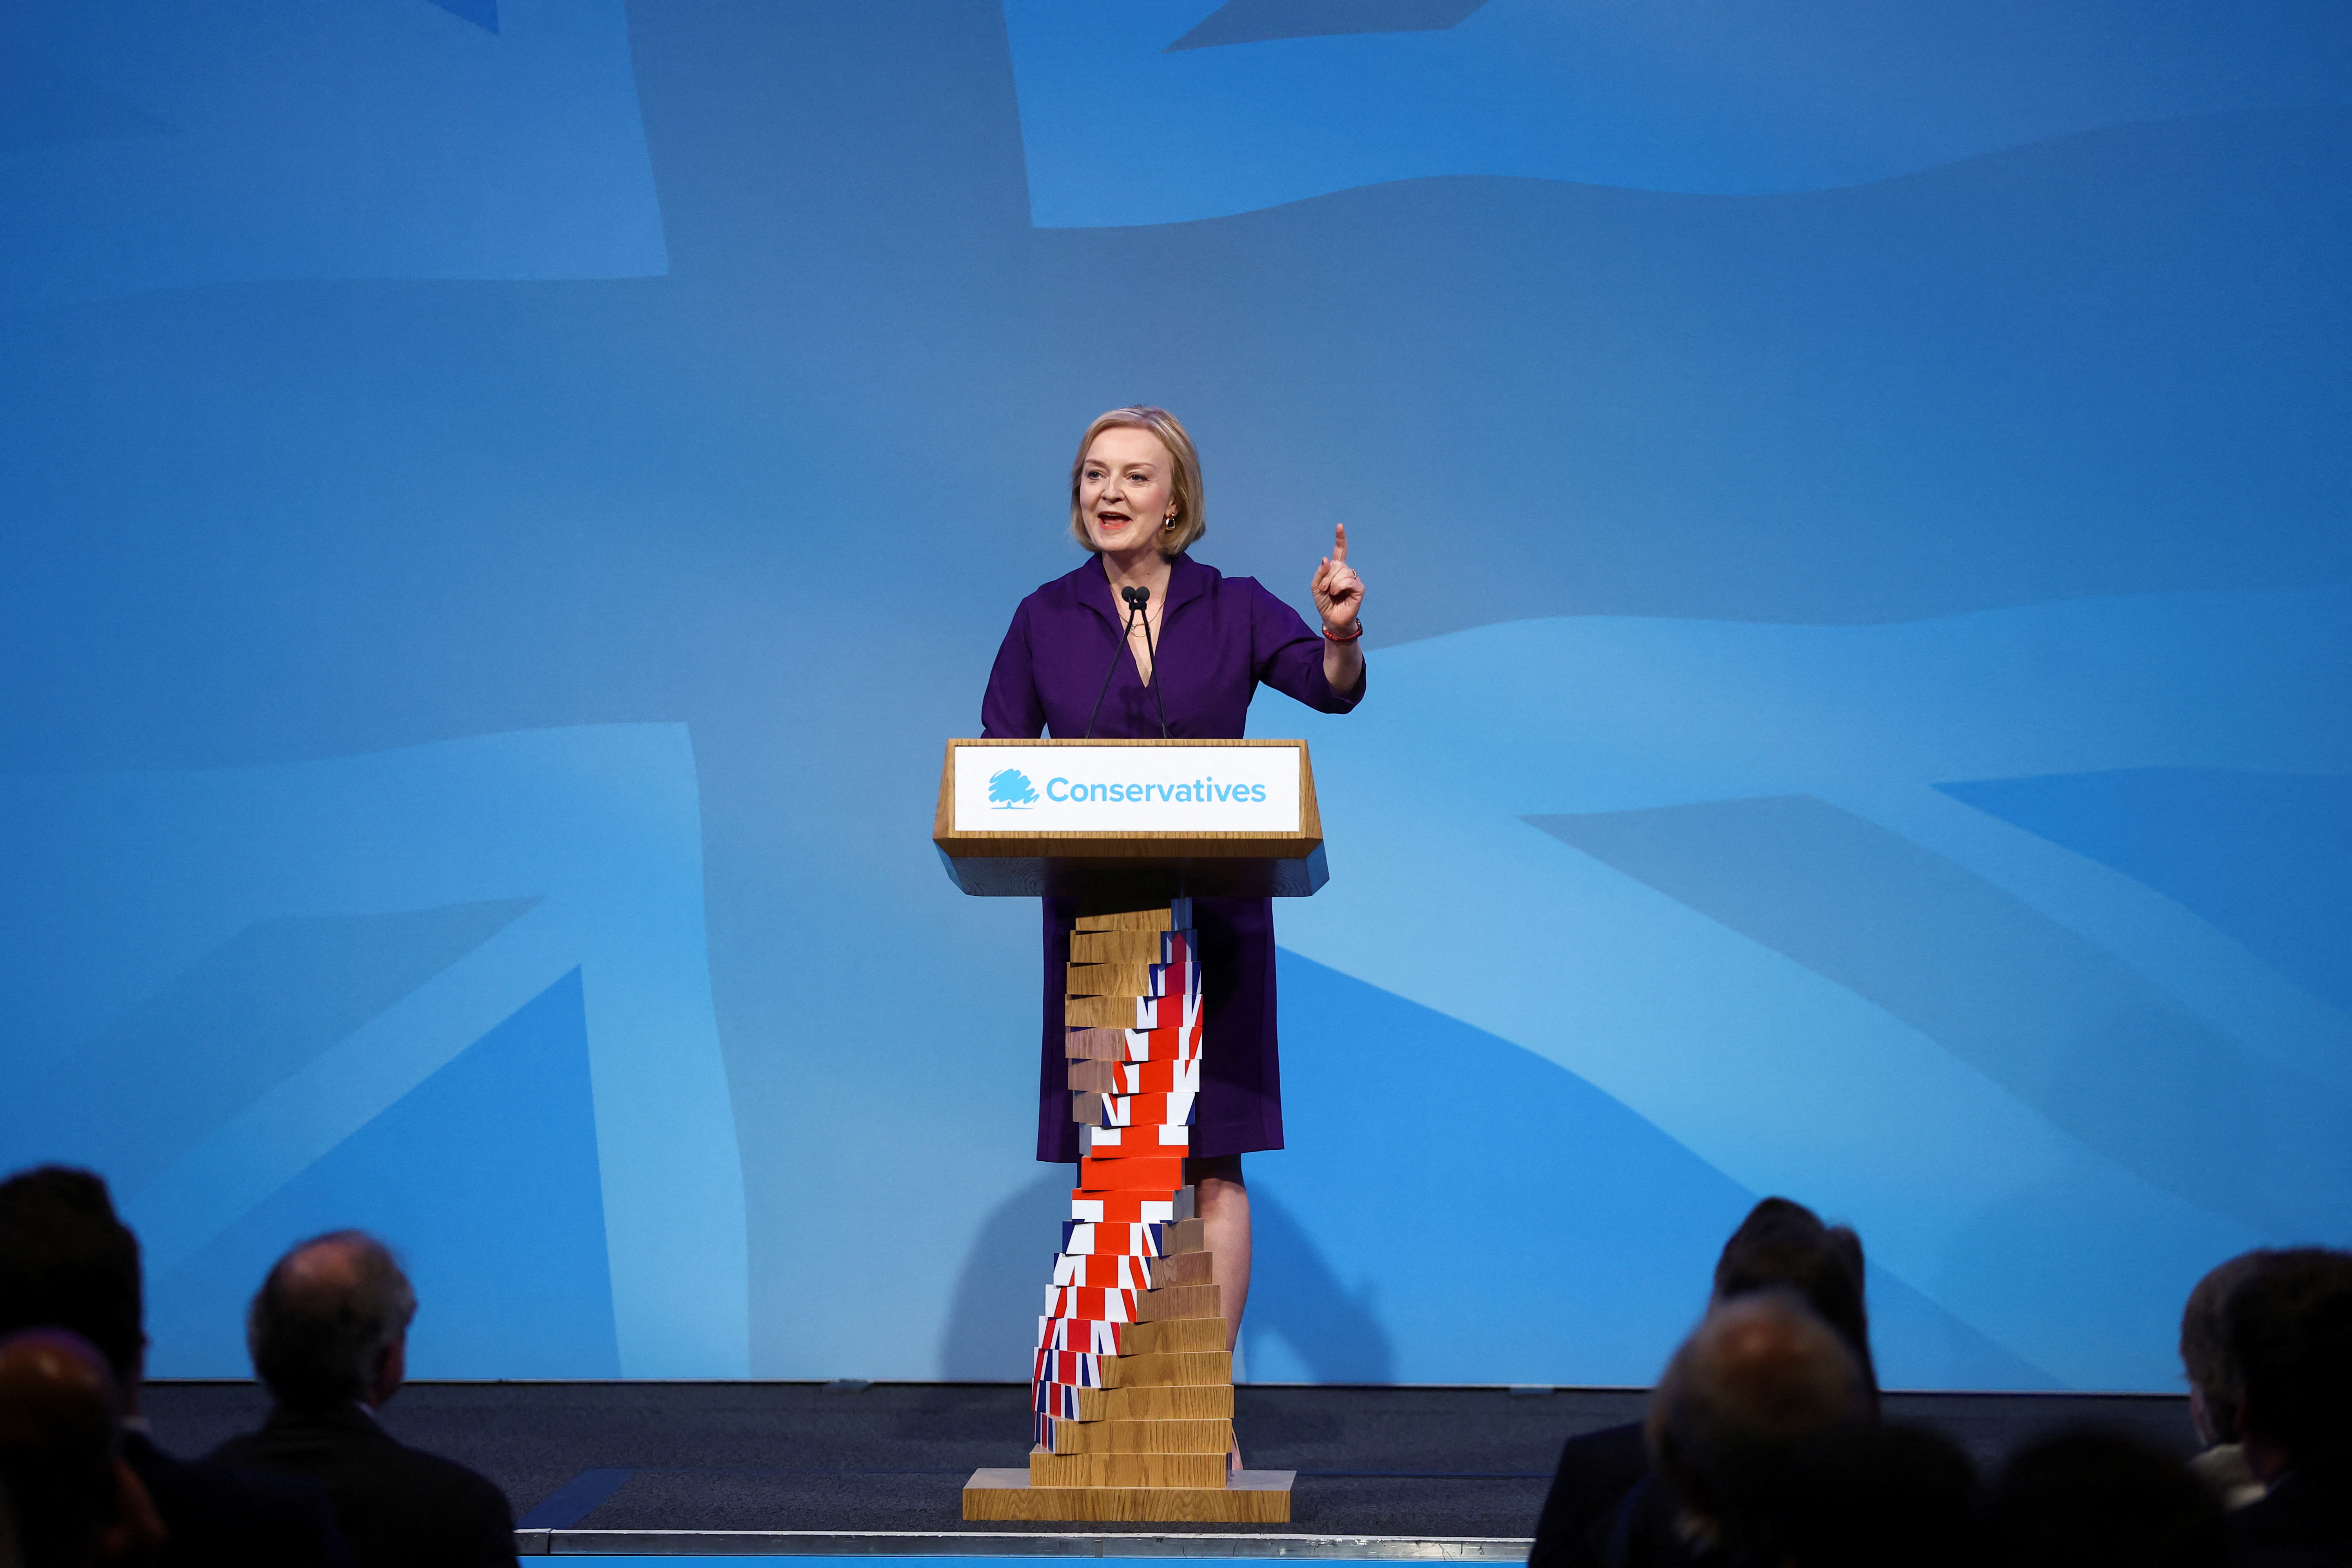 Truss promised to lift the country out of crisis through tax cuts, energy spending and measures to stimulate economic growth.  (REUTERS/Hannah McKay)